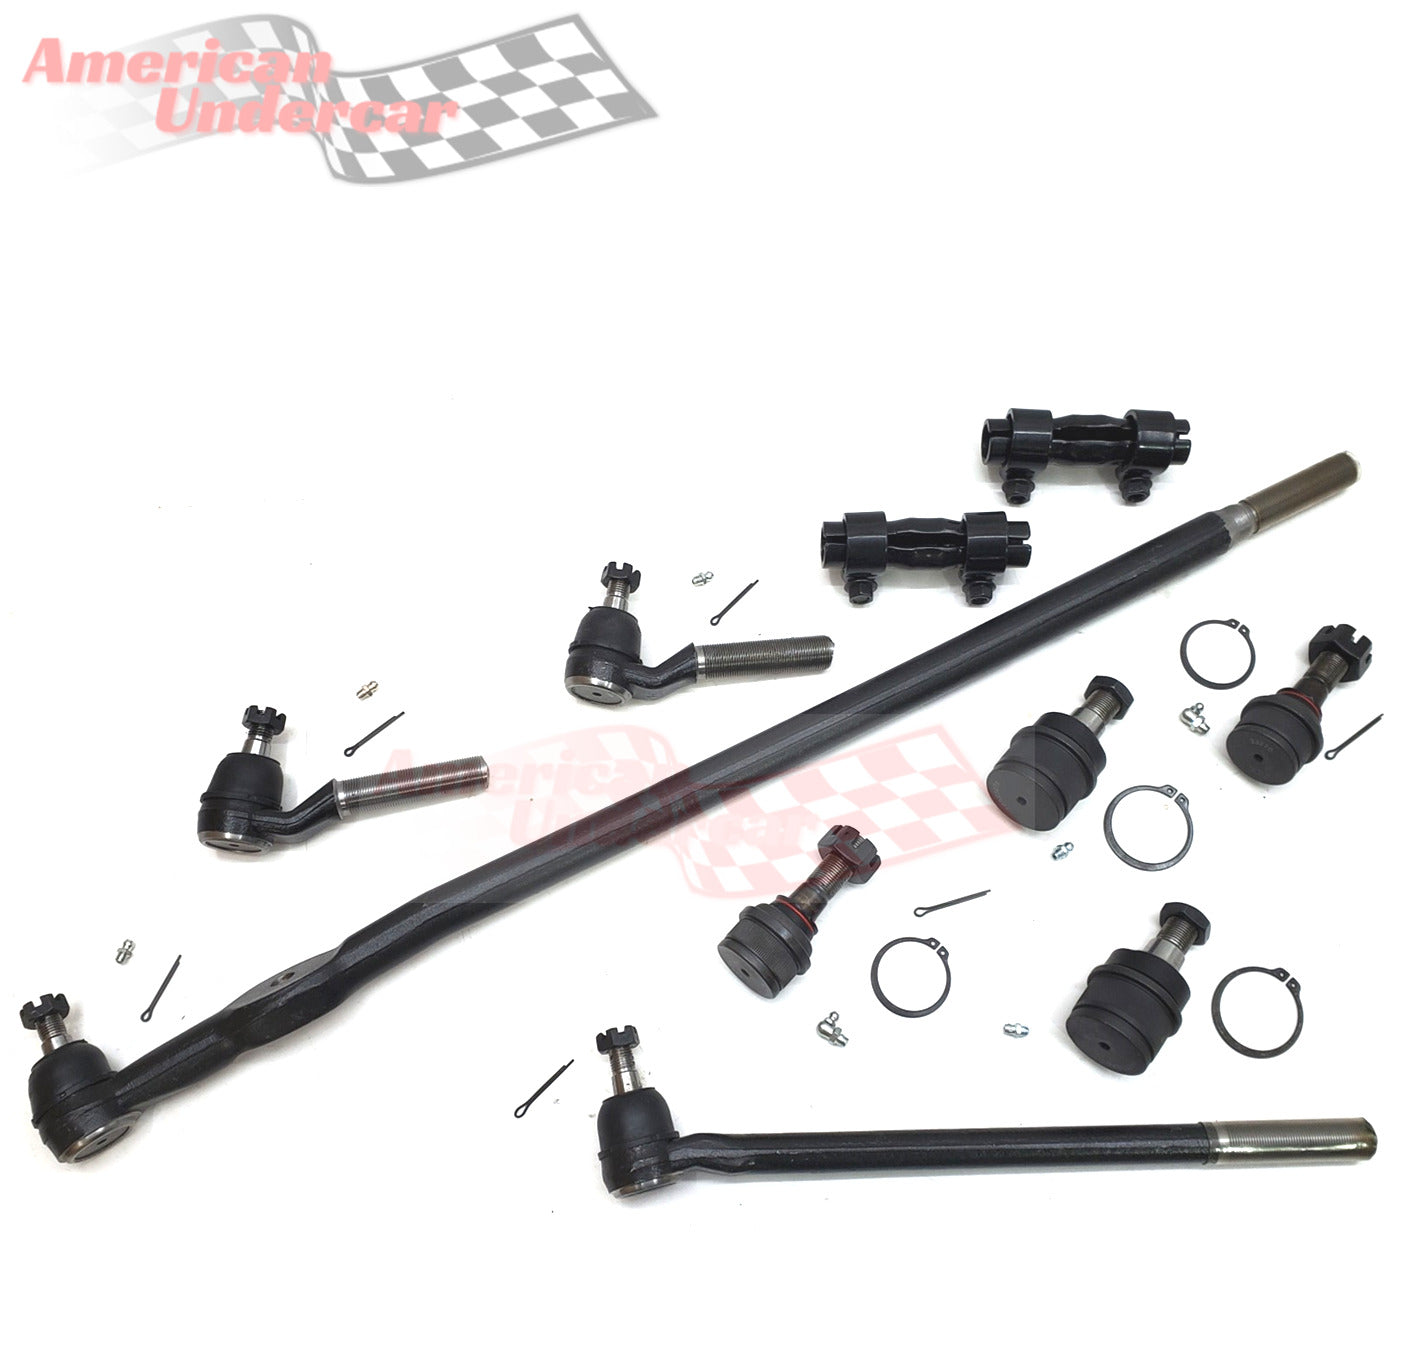 HD Ball Joint Tie Rod Drag Link Steering Kit for 1985-1994 Ford F250 4x4 3850 Axle